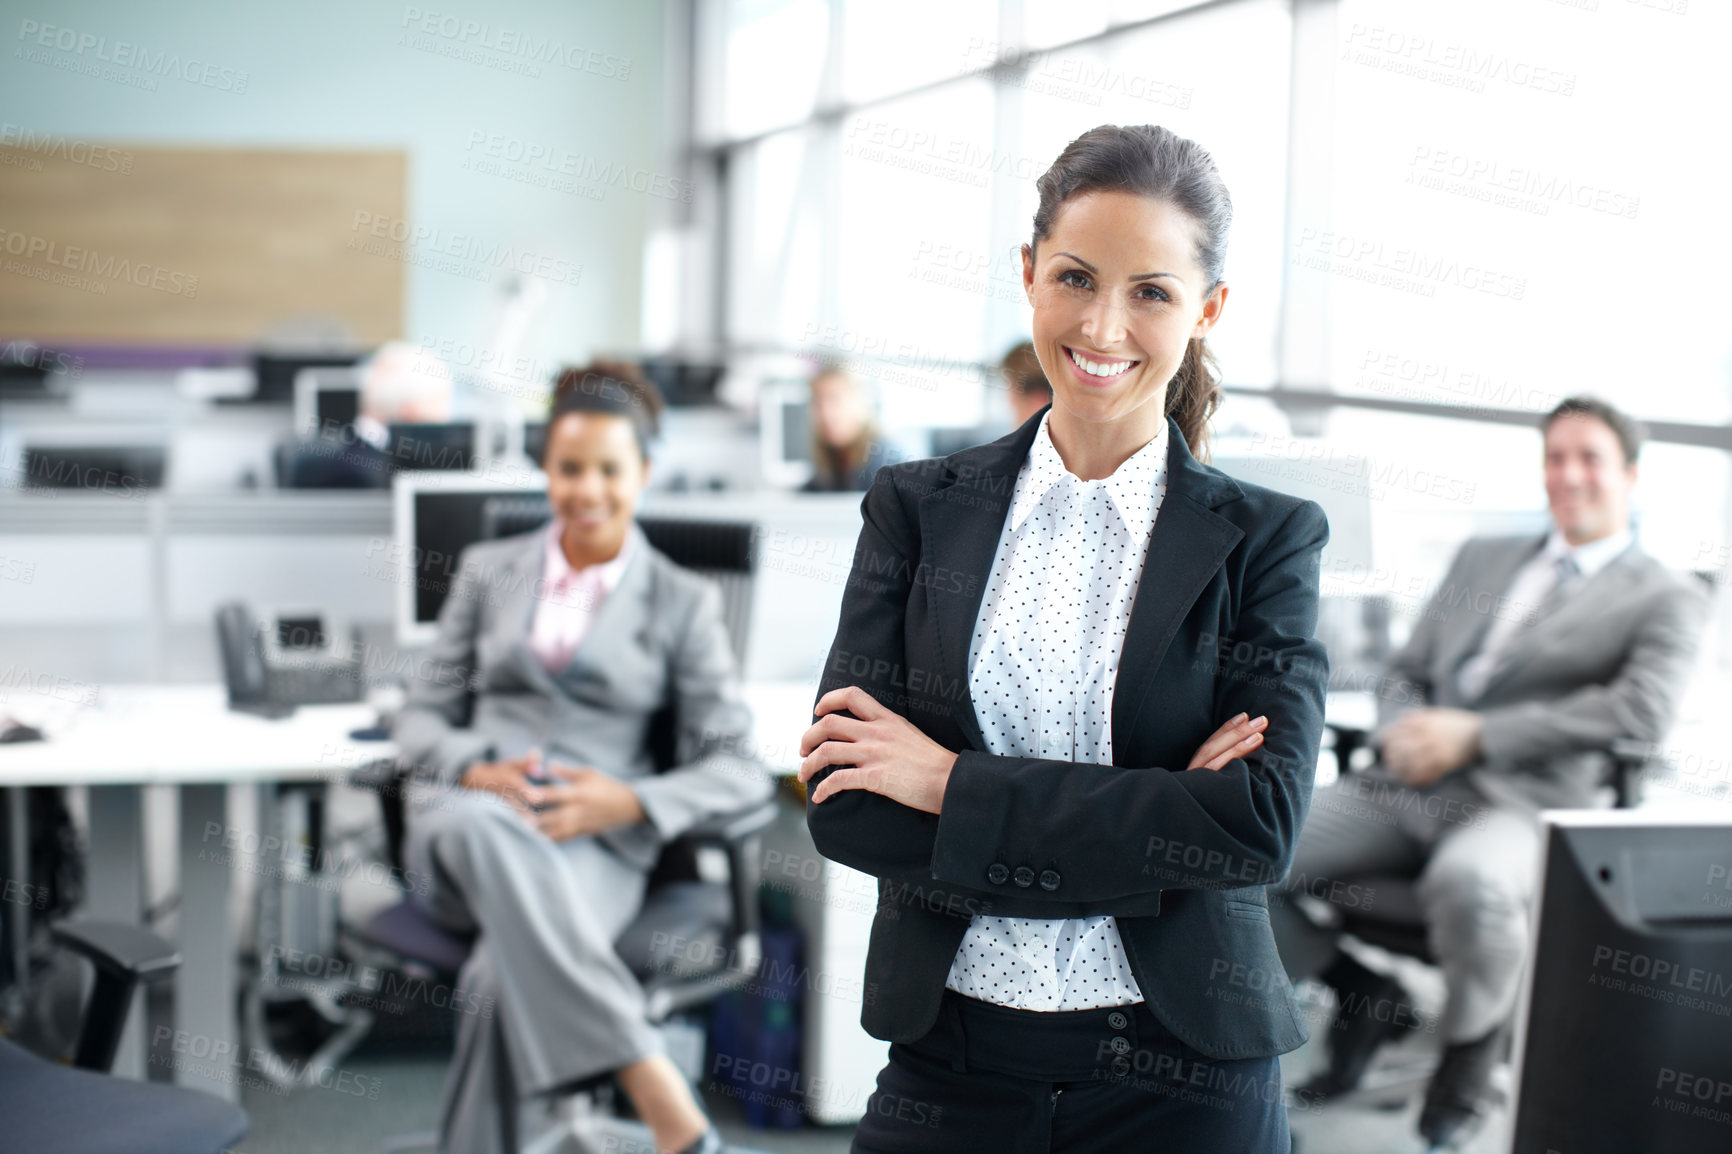 Buy stock photo Attractive young businesswoman standing confidently in the office with her coworkers behind her - portrait